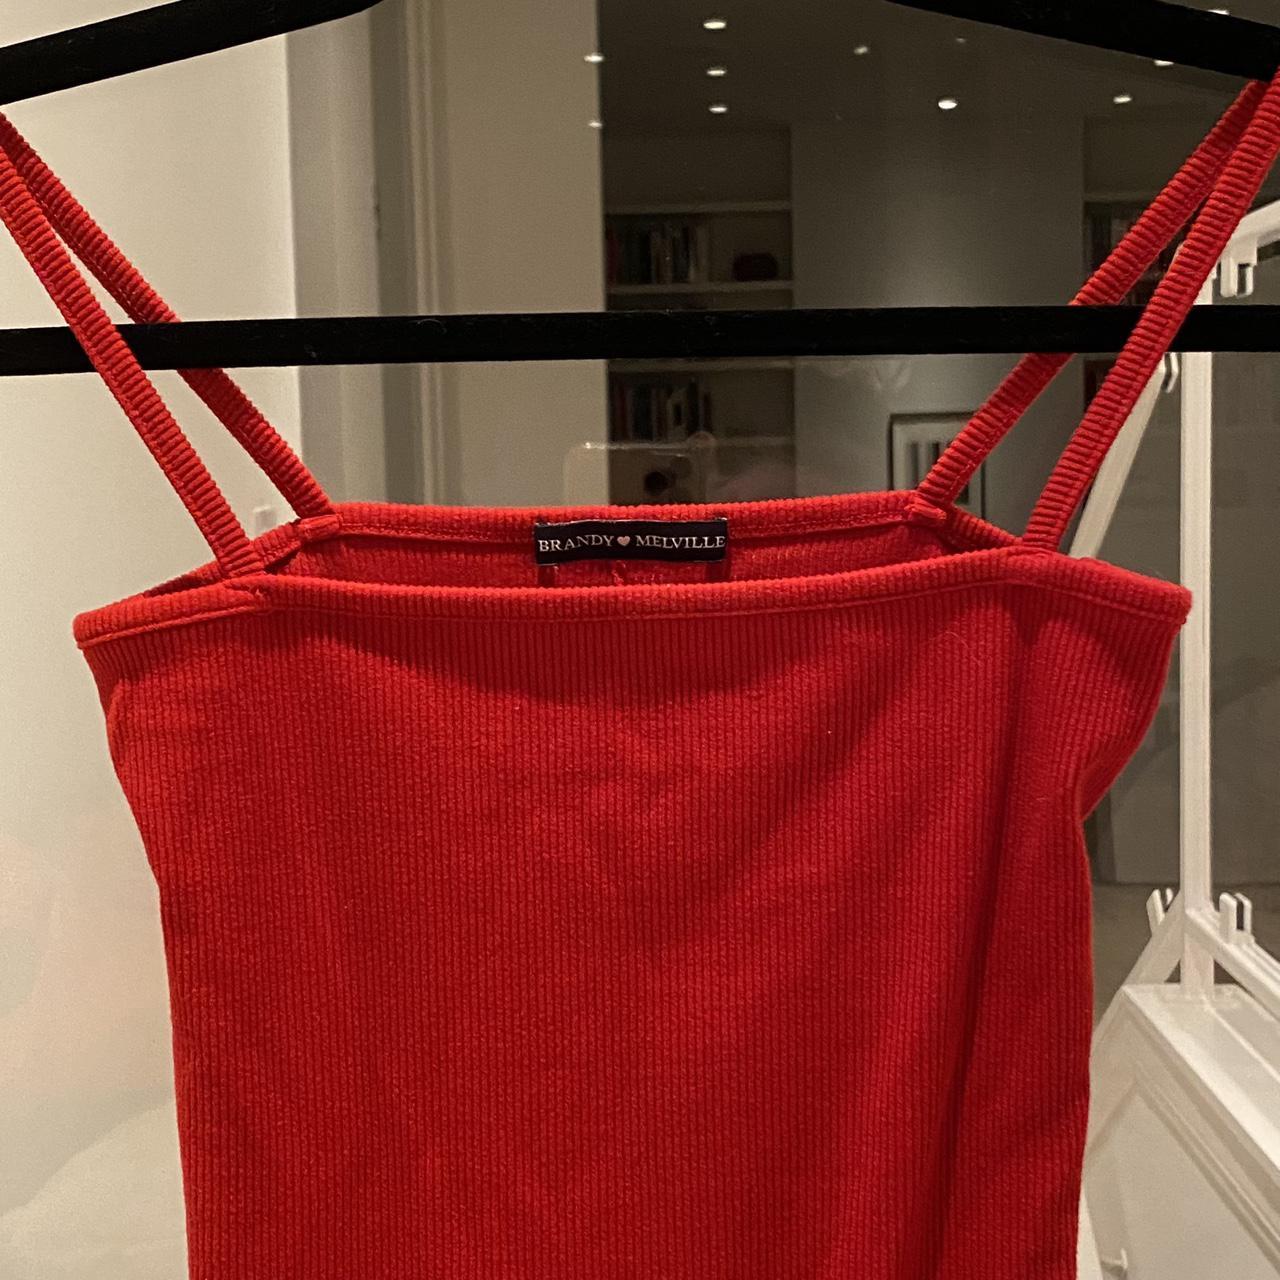 Brandy Melville Solid Red Bodysuit Size 3 - 55% off